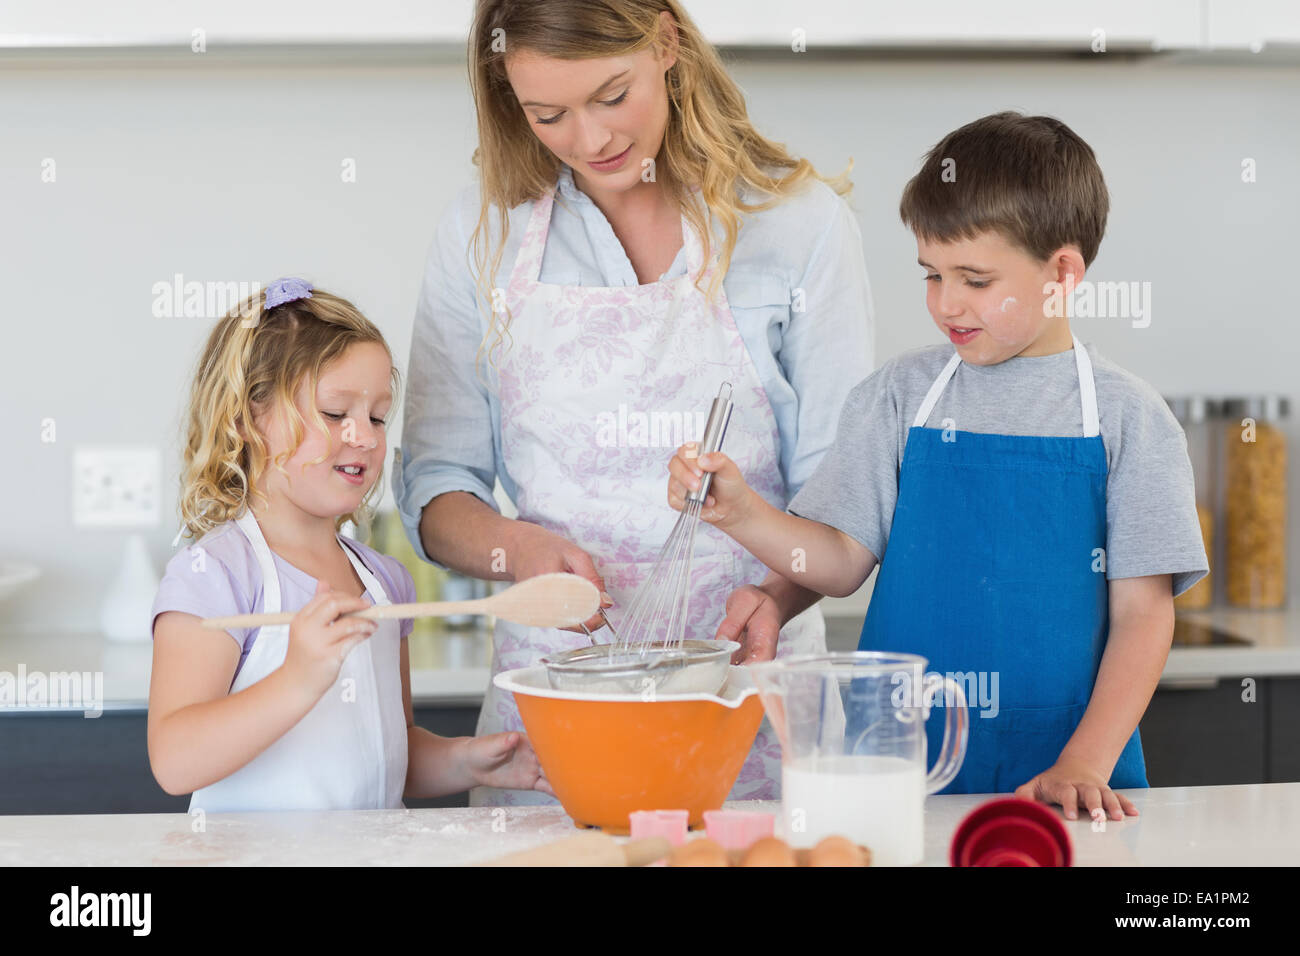 Children and mother baking cookies Stock Photo